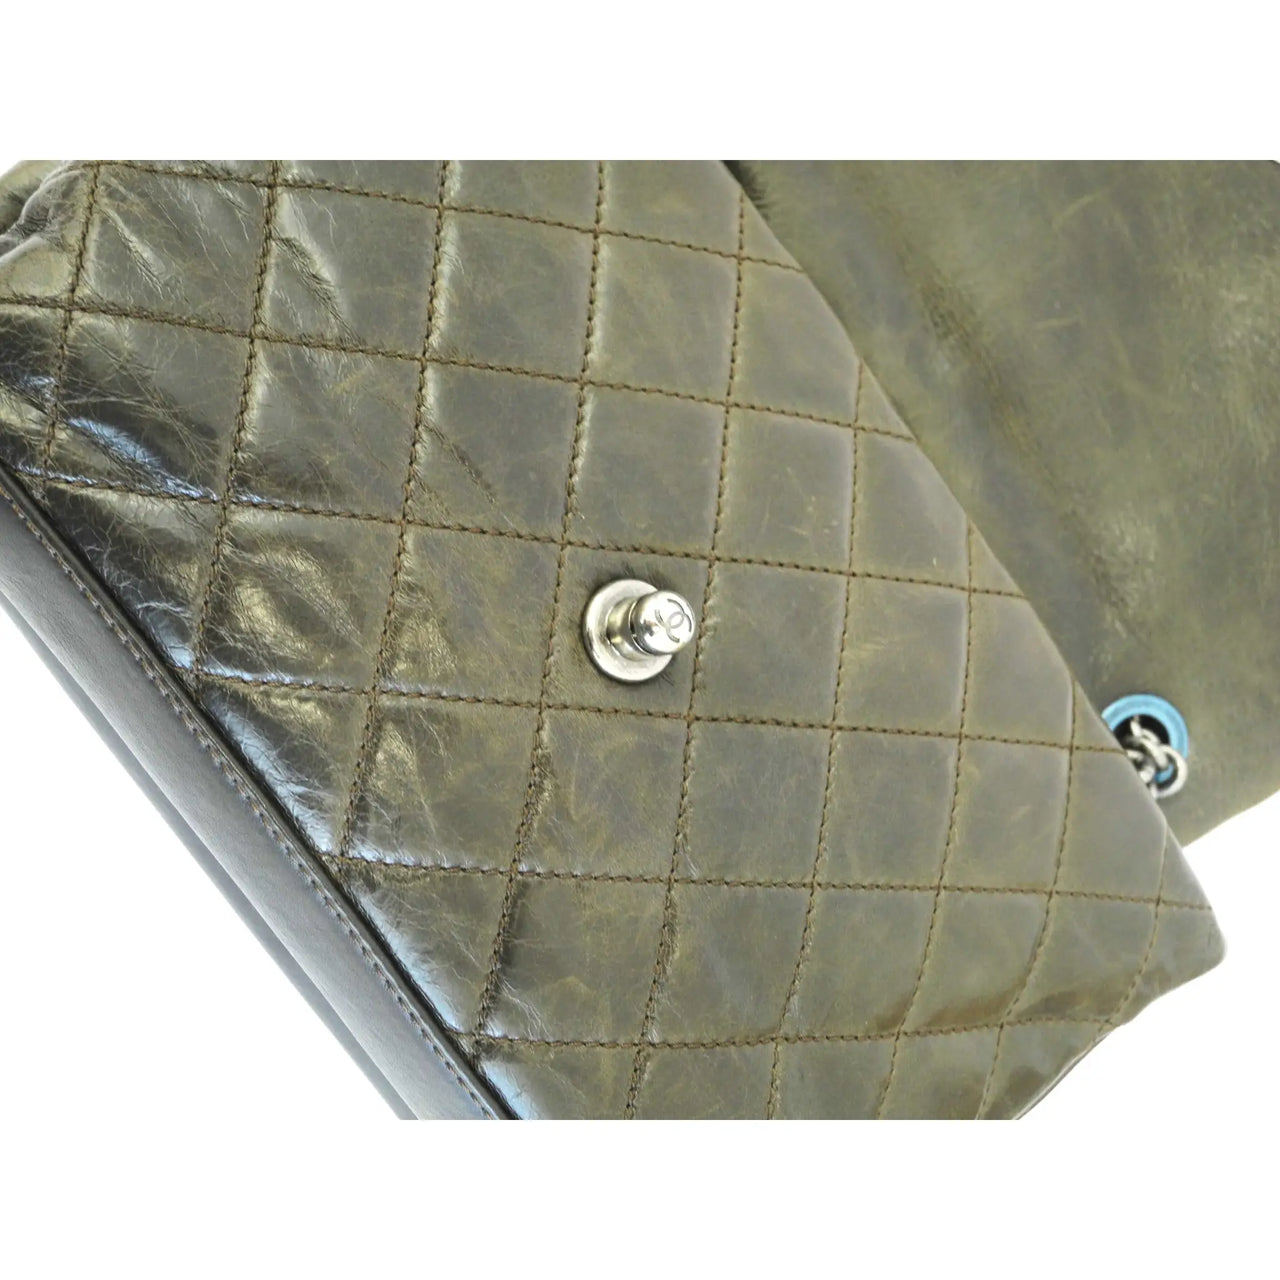 Chanel Patent Quilted Charm Gala Clutch